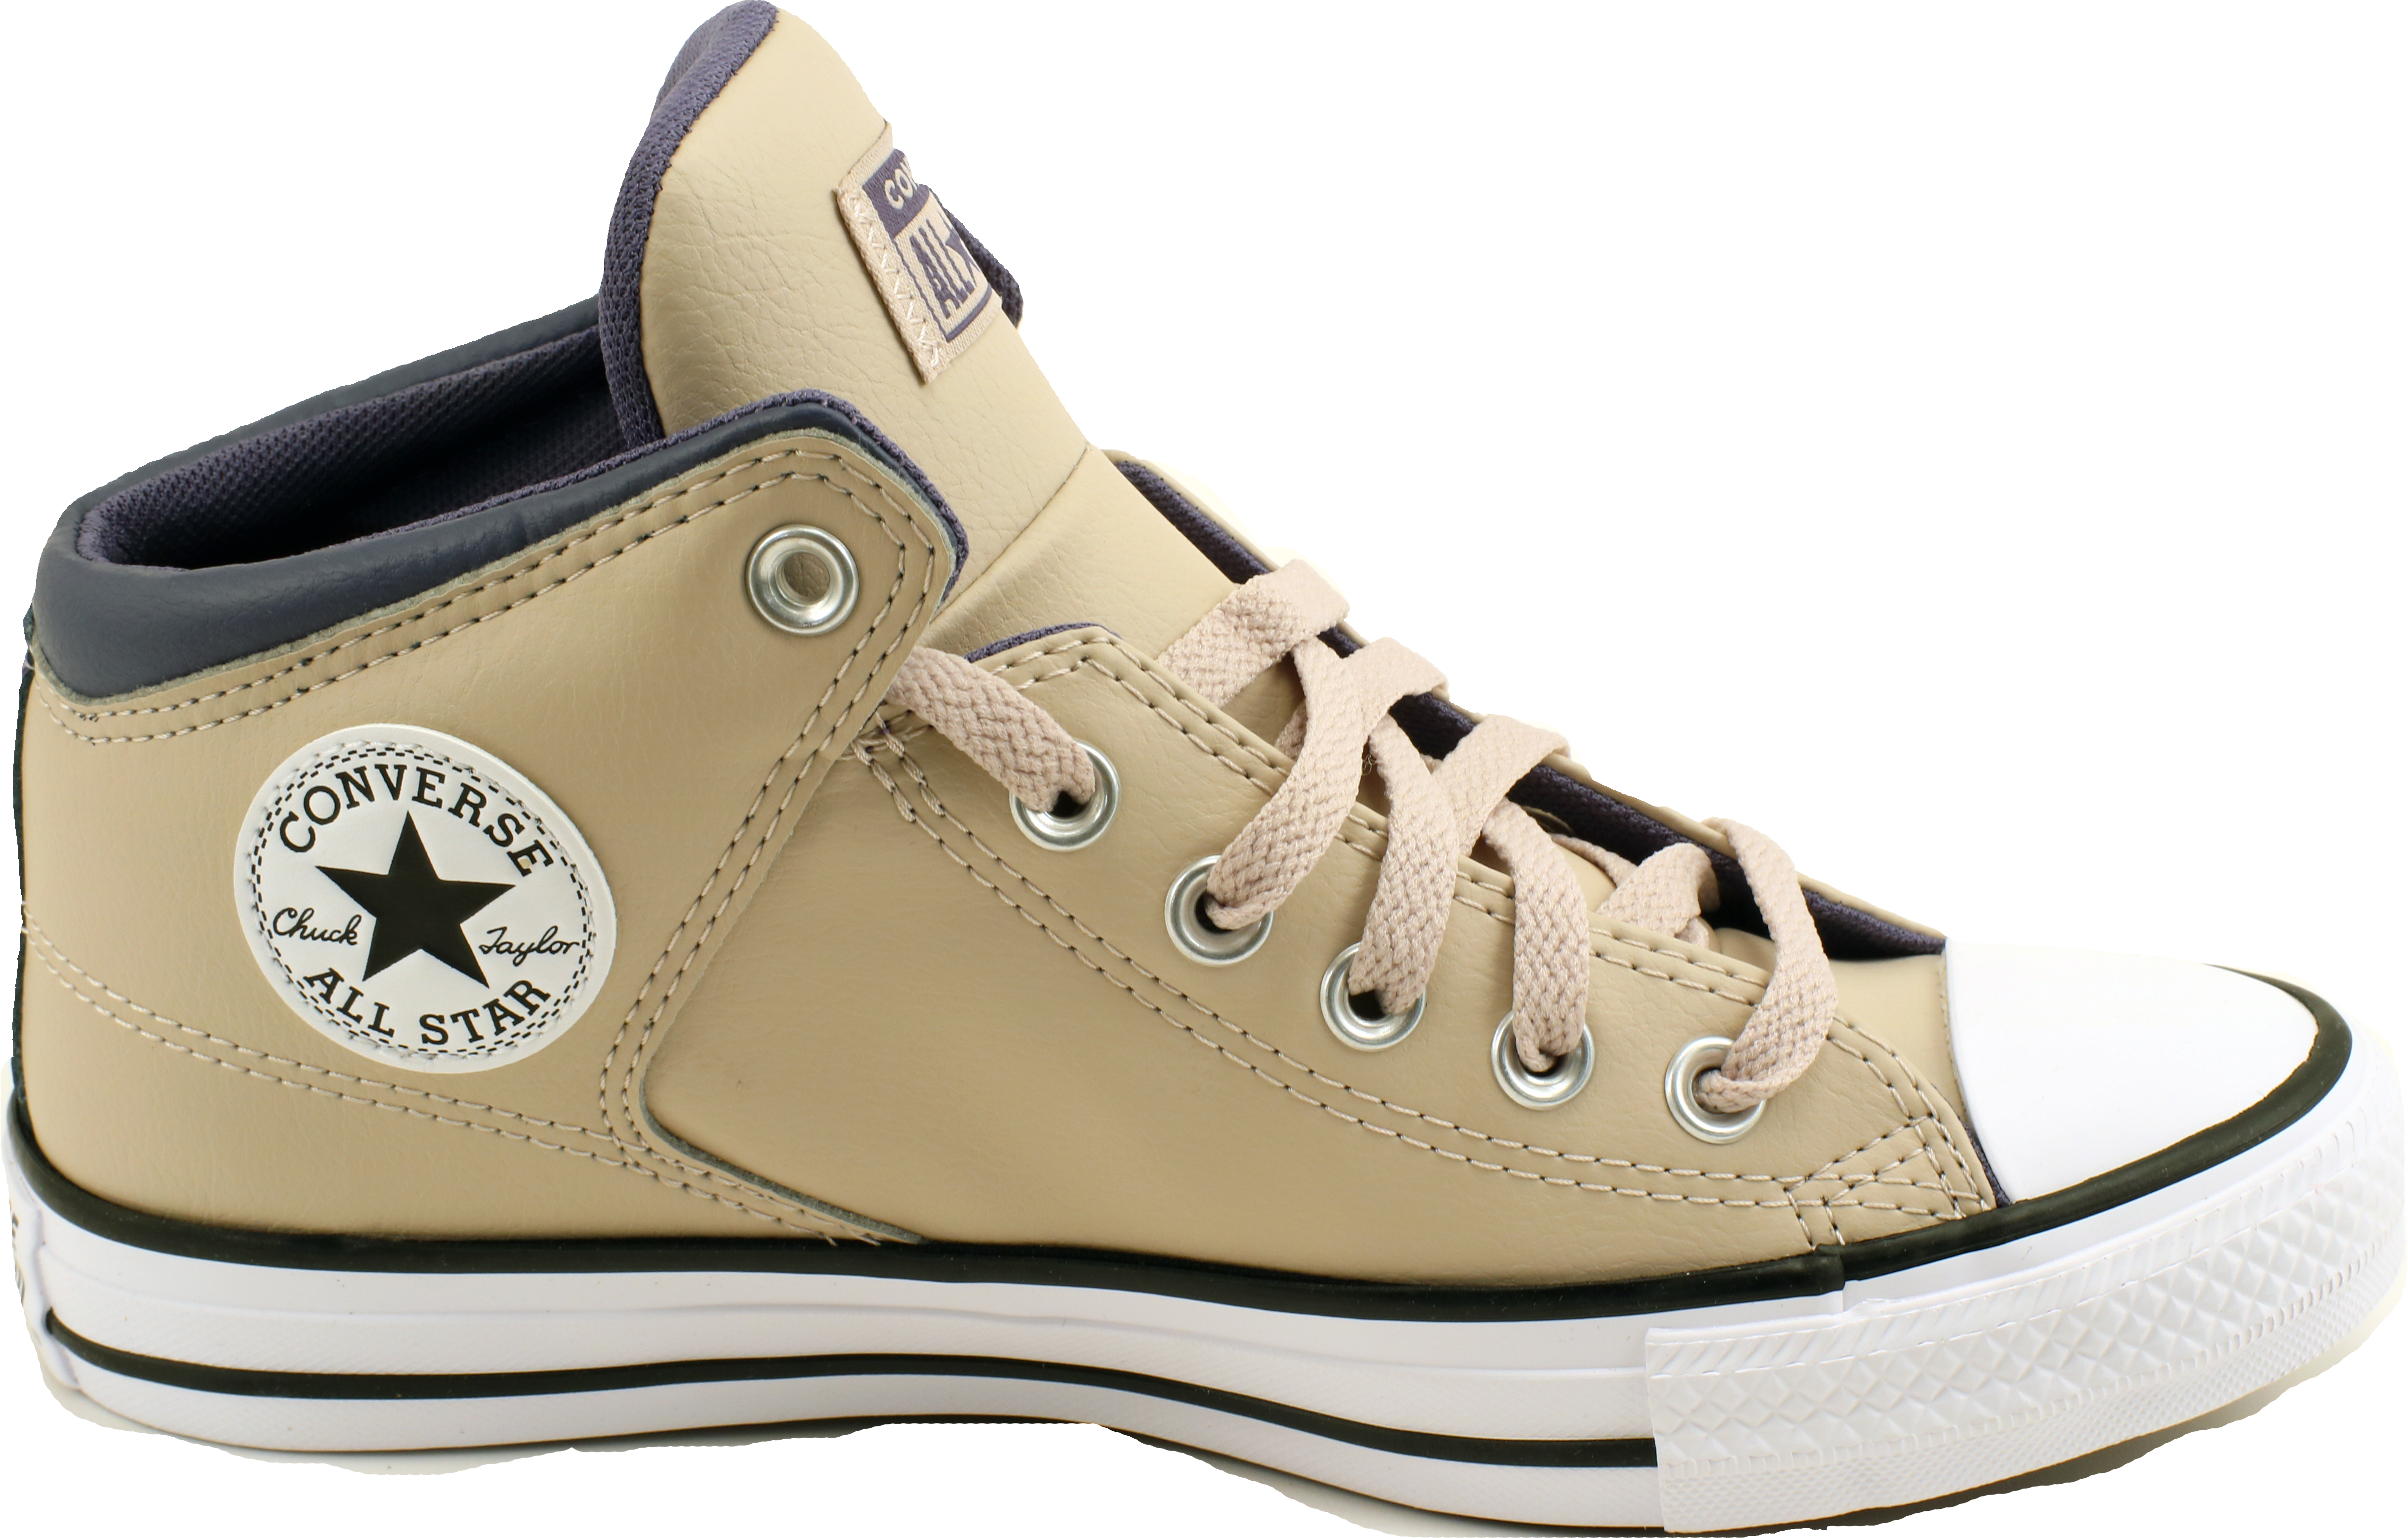 Converse Chuck Taylor All Star High Street - Mid - String / Steel / White Imitation leather